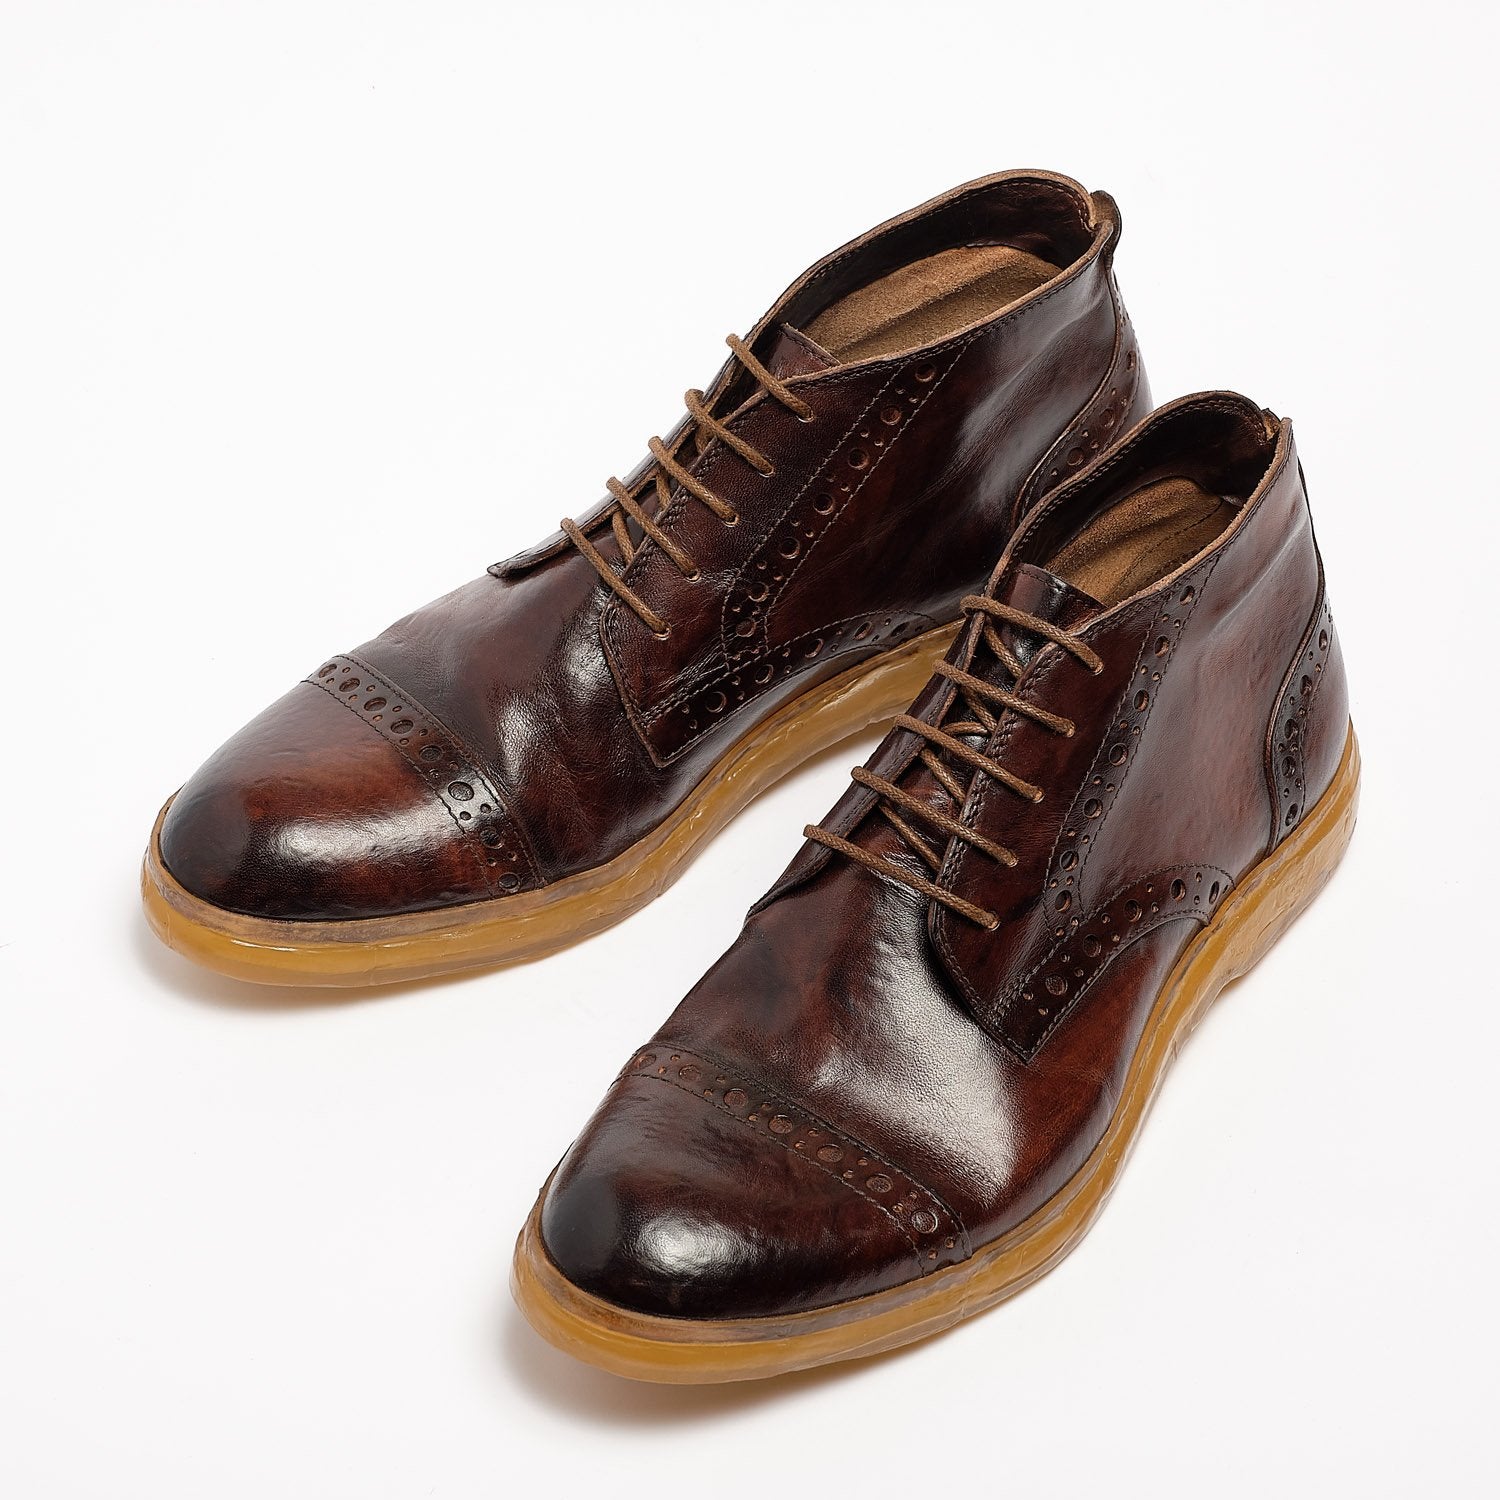 Darren Laced Mid Shoes natural vacchetta leather dark_brown